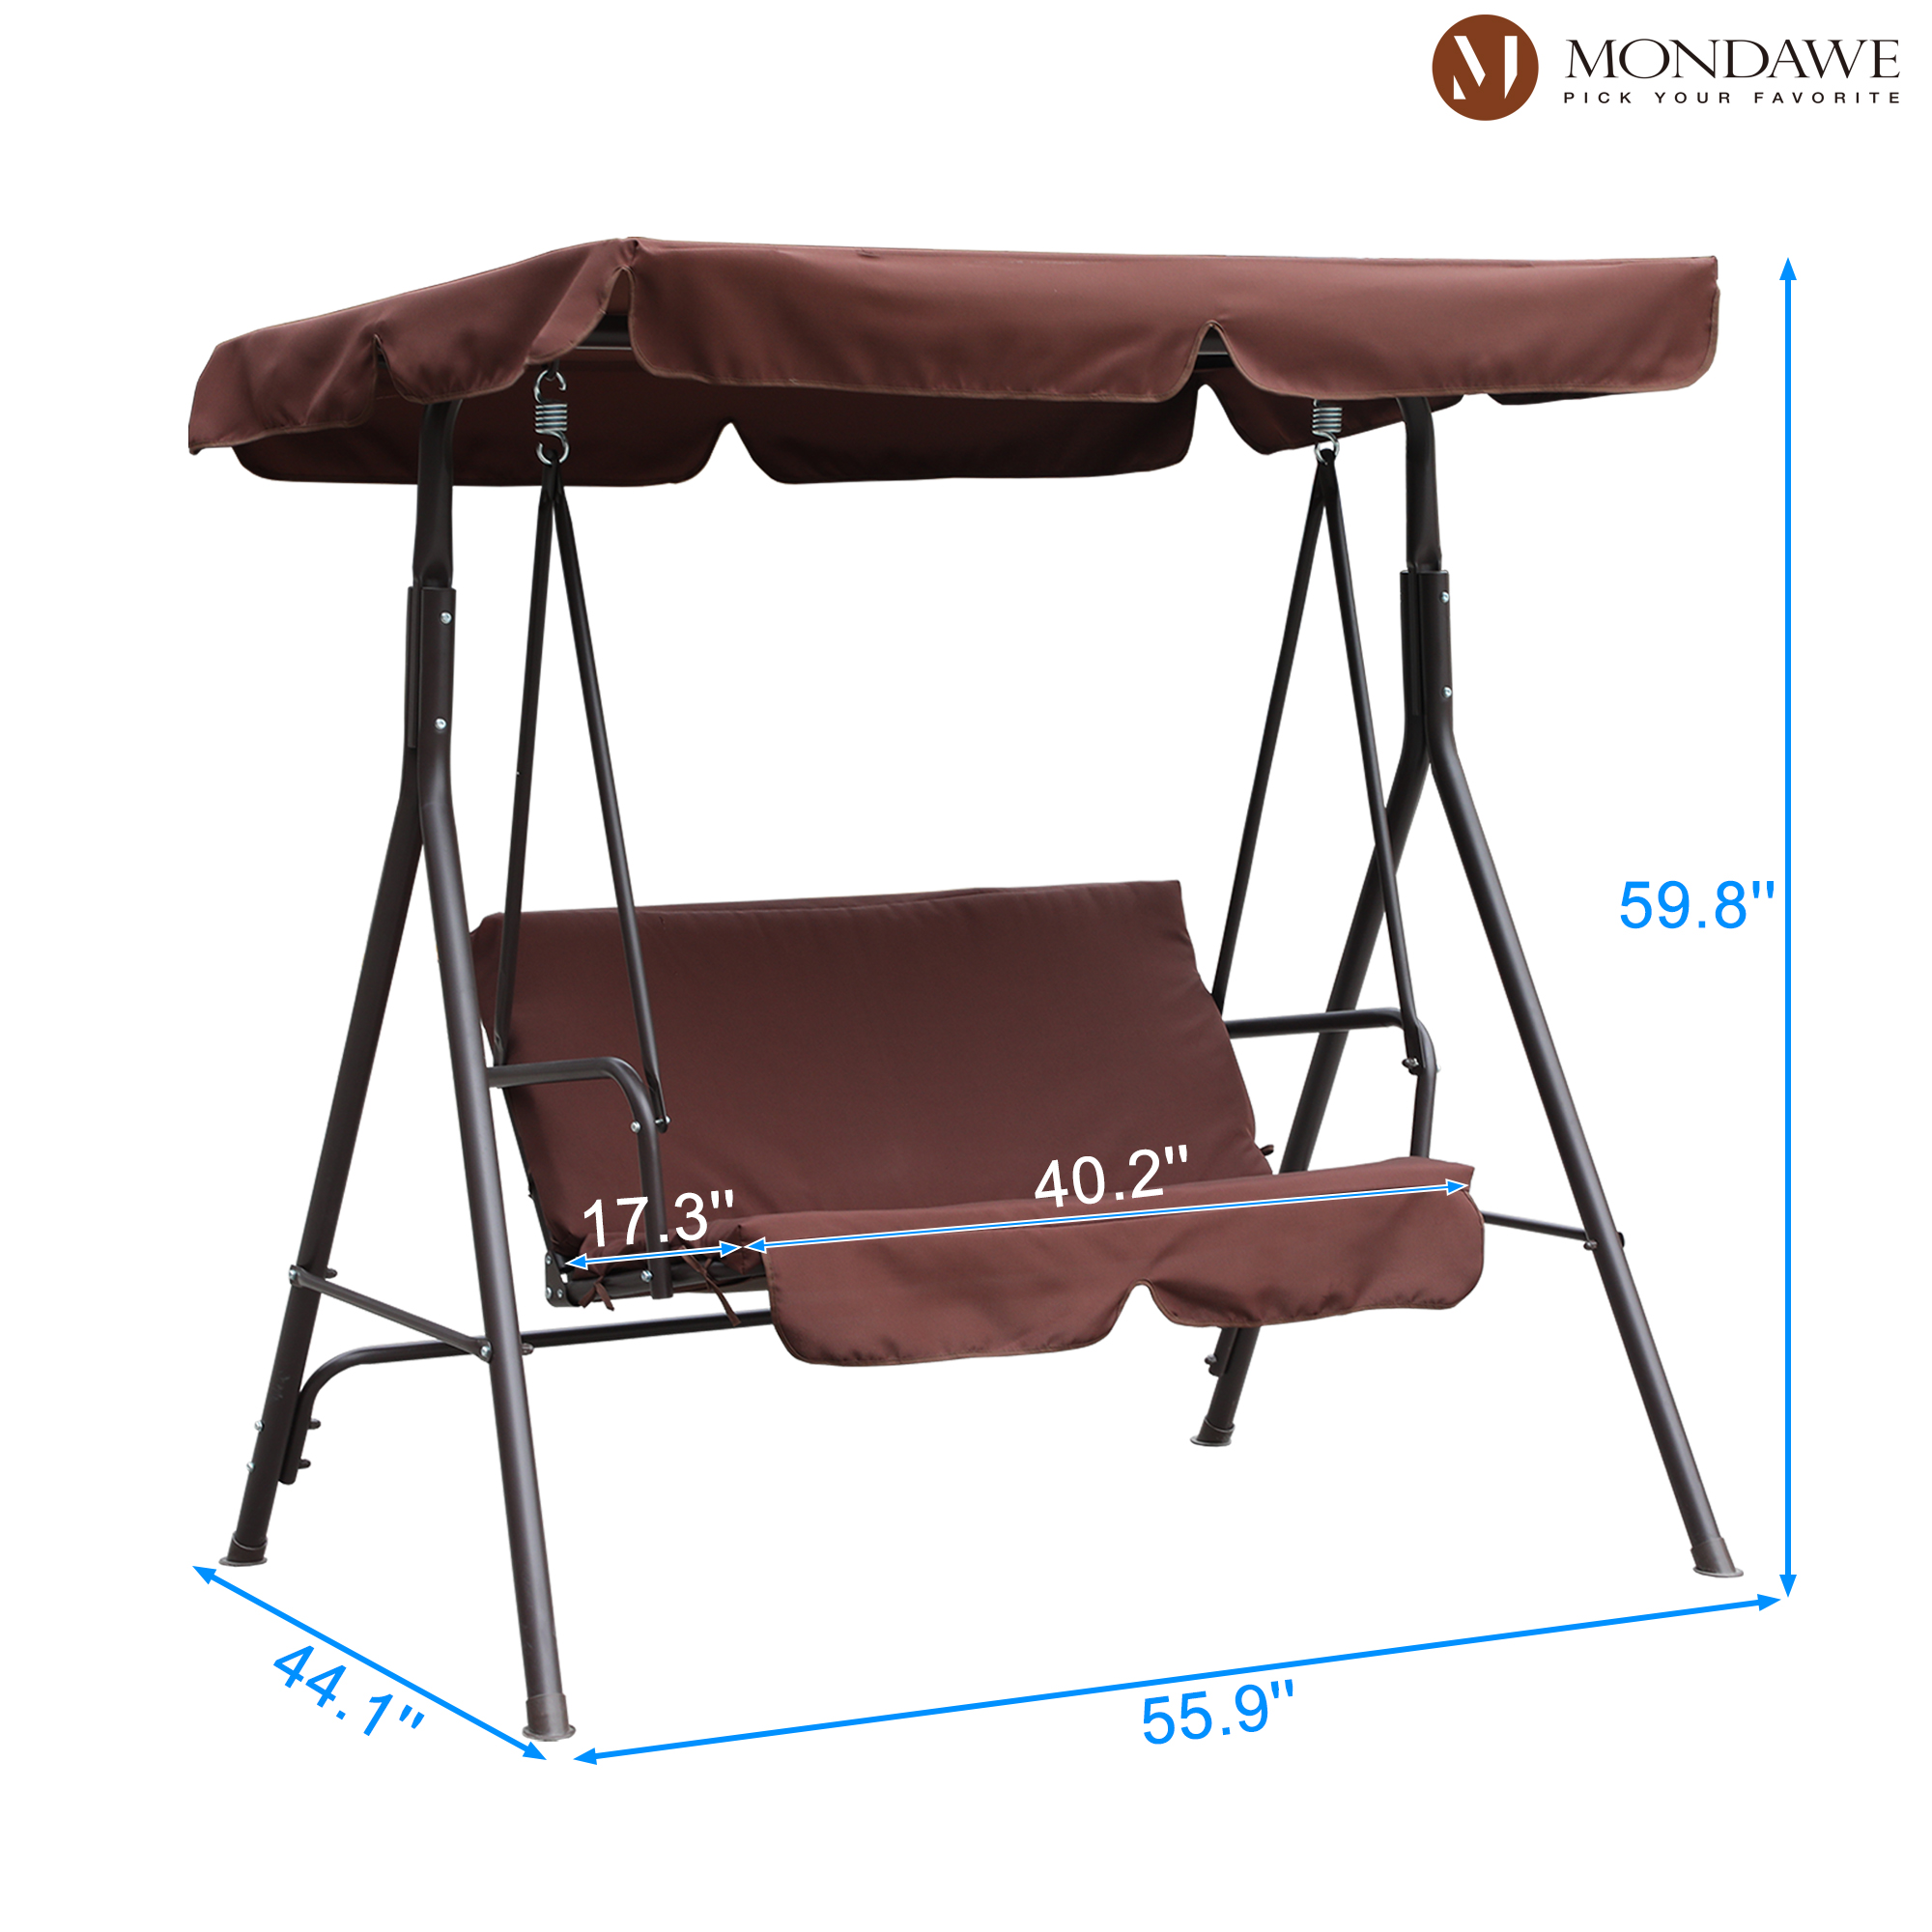 Mondawe Steel 2-Person Outdoor Canopy Swing Patio Swing Chair Porch Swing with Removable Cushion and Convertible Canopy-Mondawe